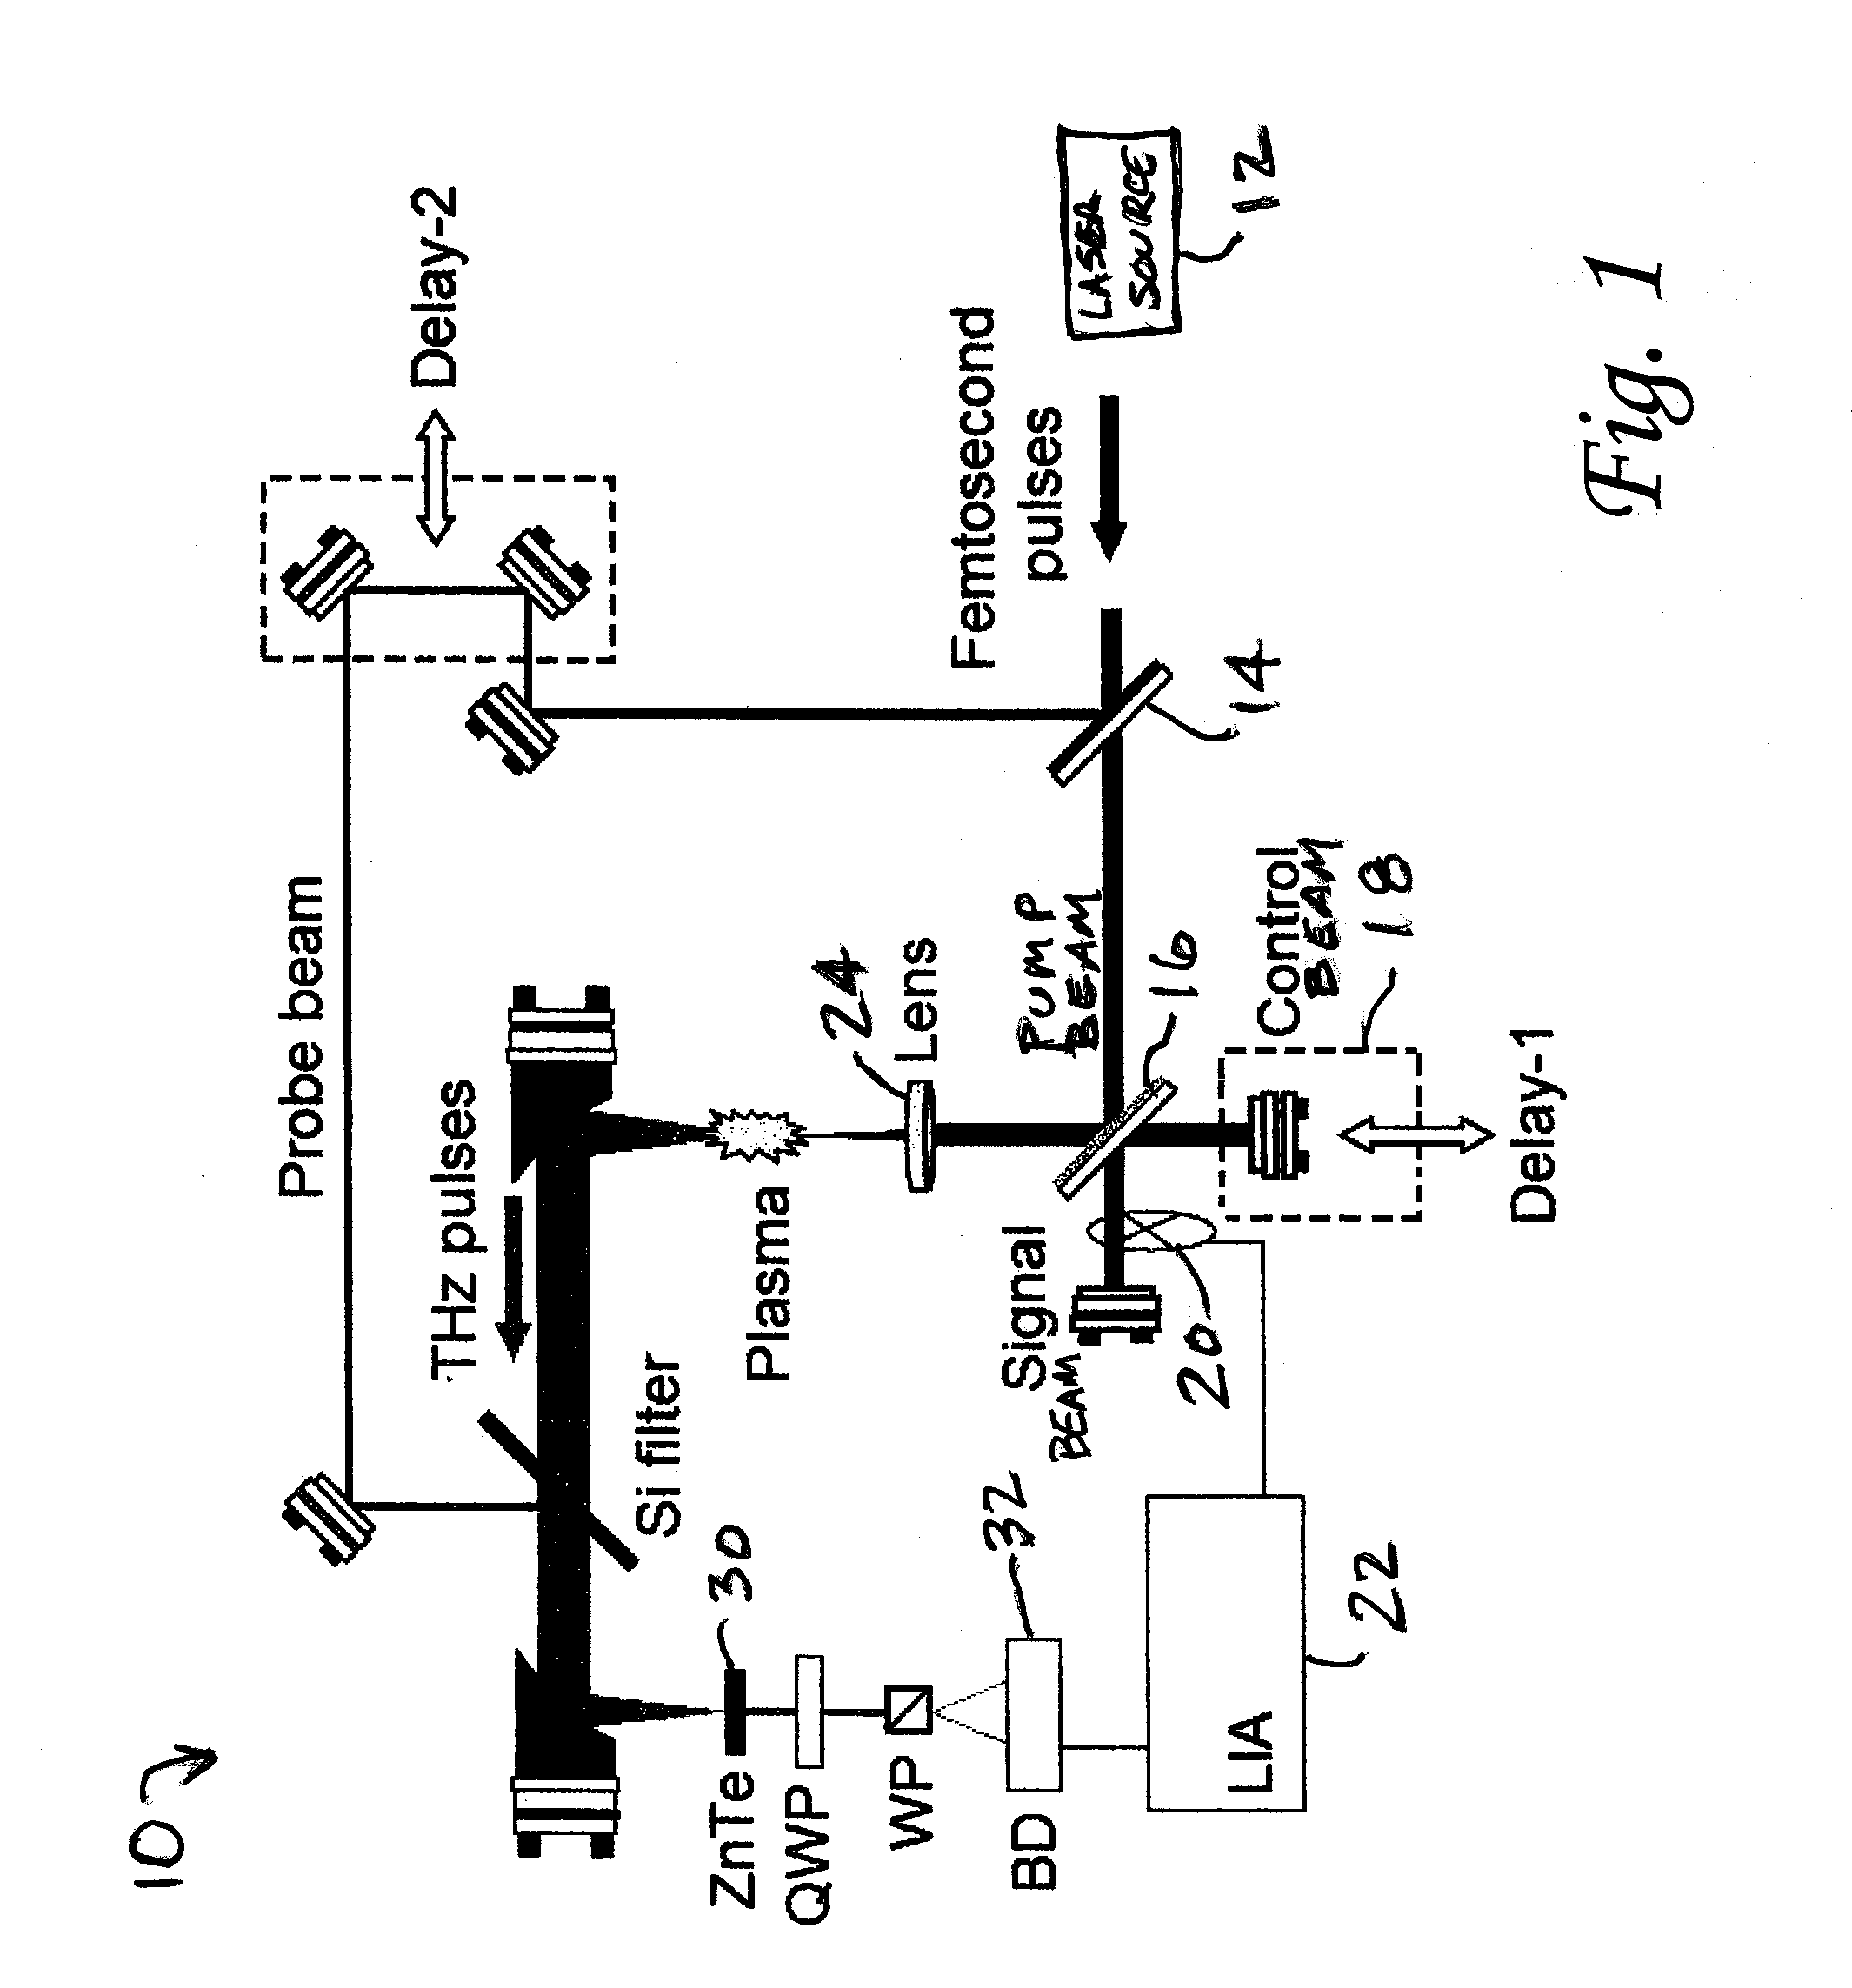 Methods and systems for the enhancement of terahertz wave generation for analyzing a remotely-located object